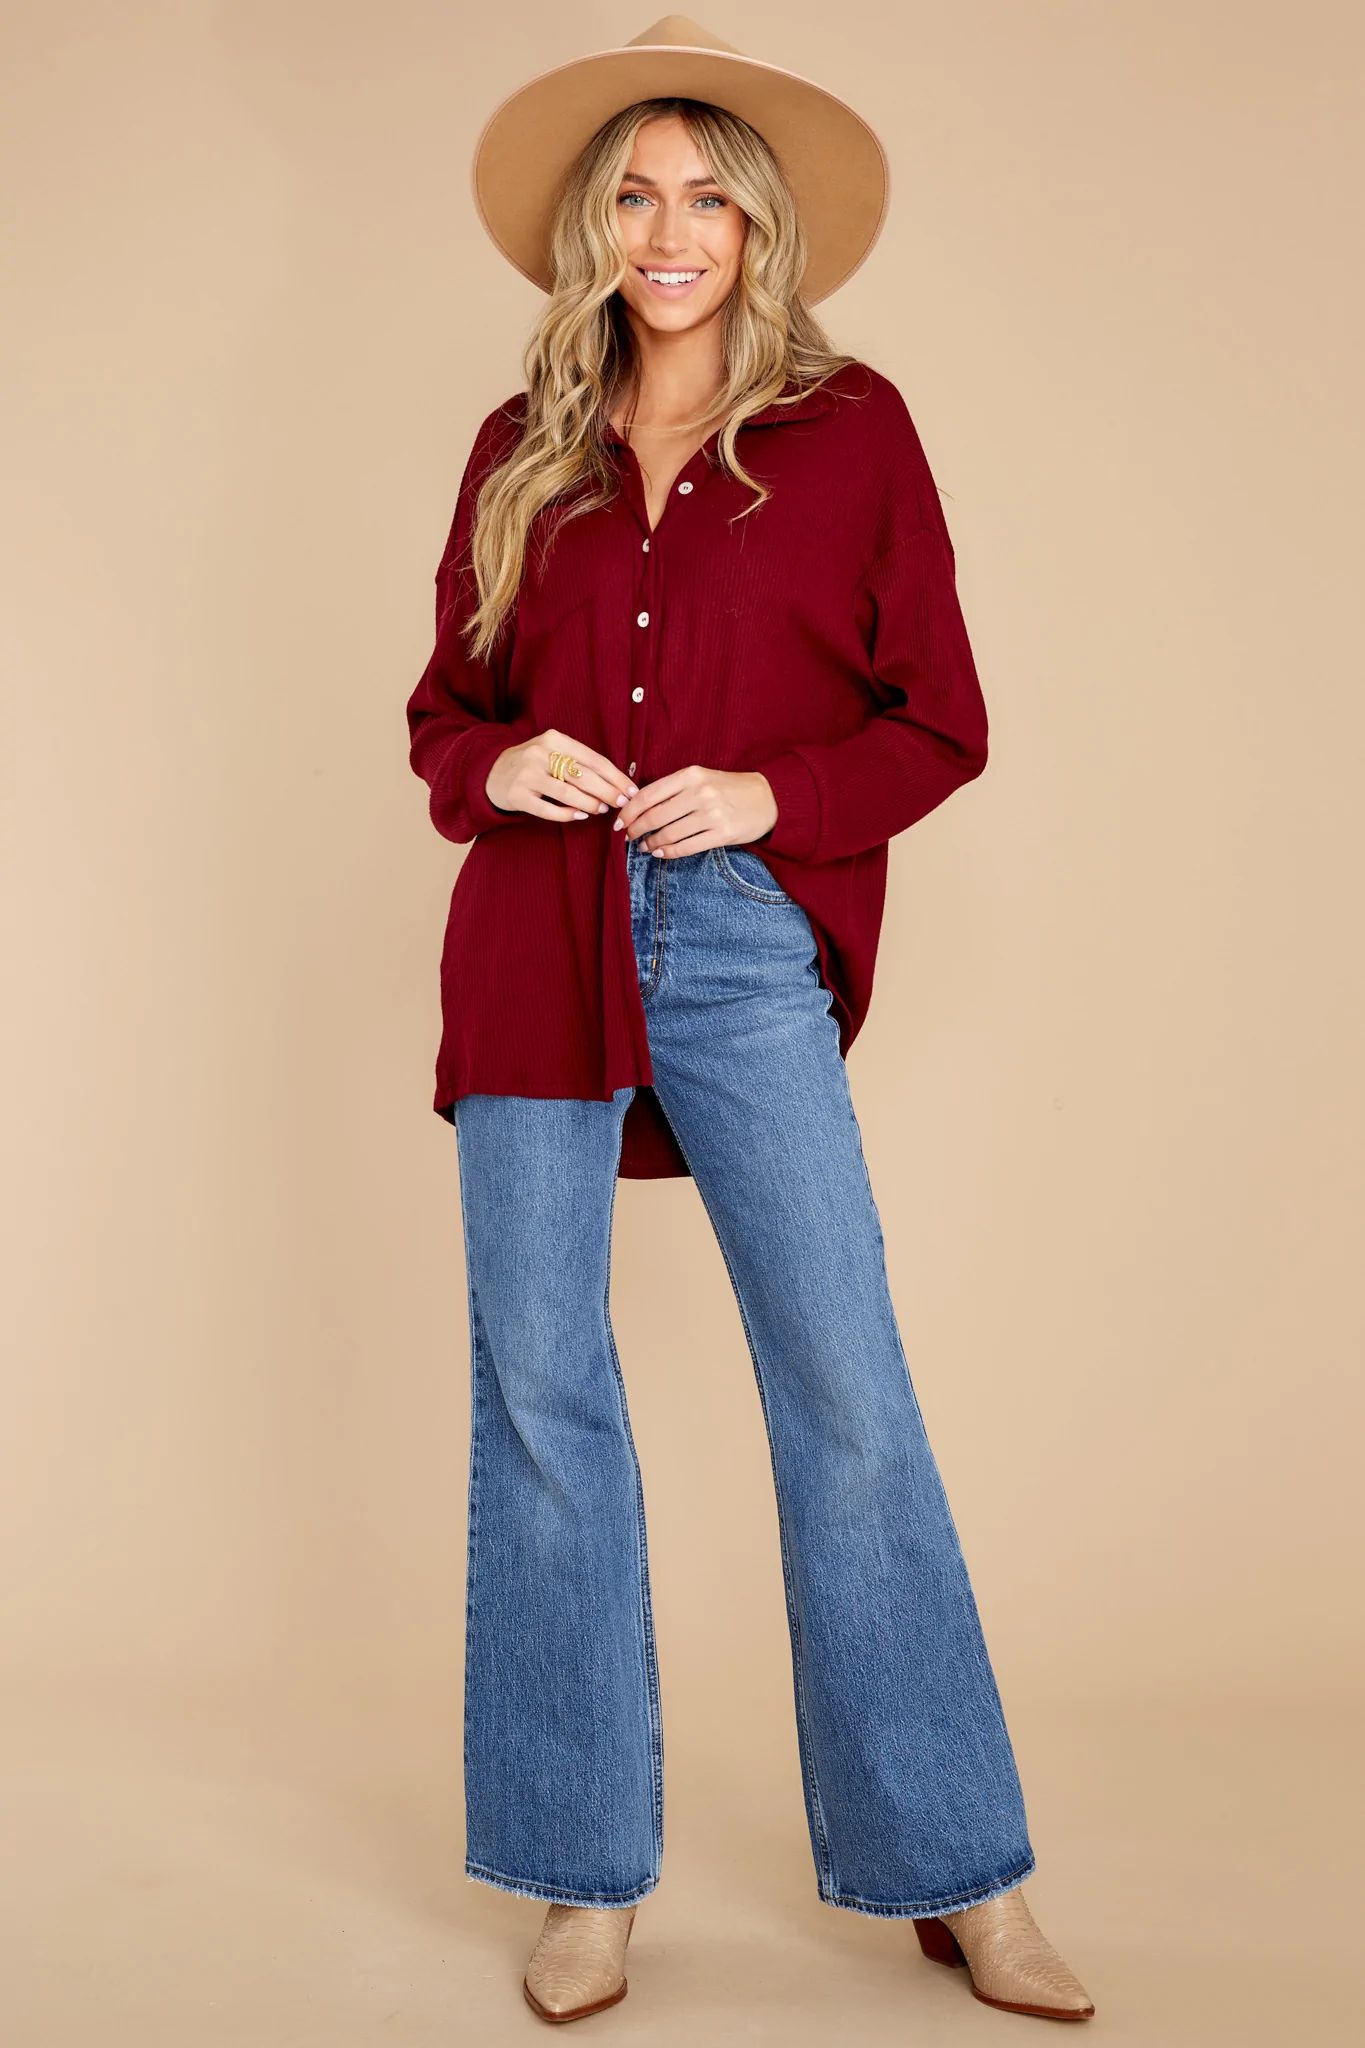 Set On You Burgundy Top | Red Dress 